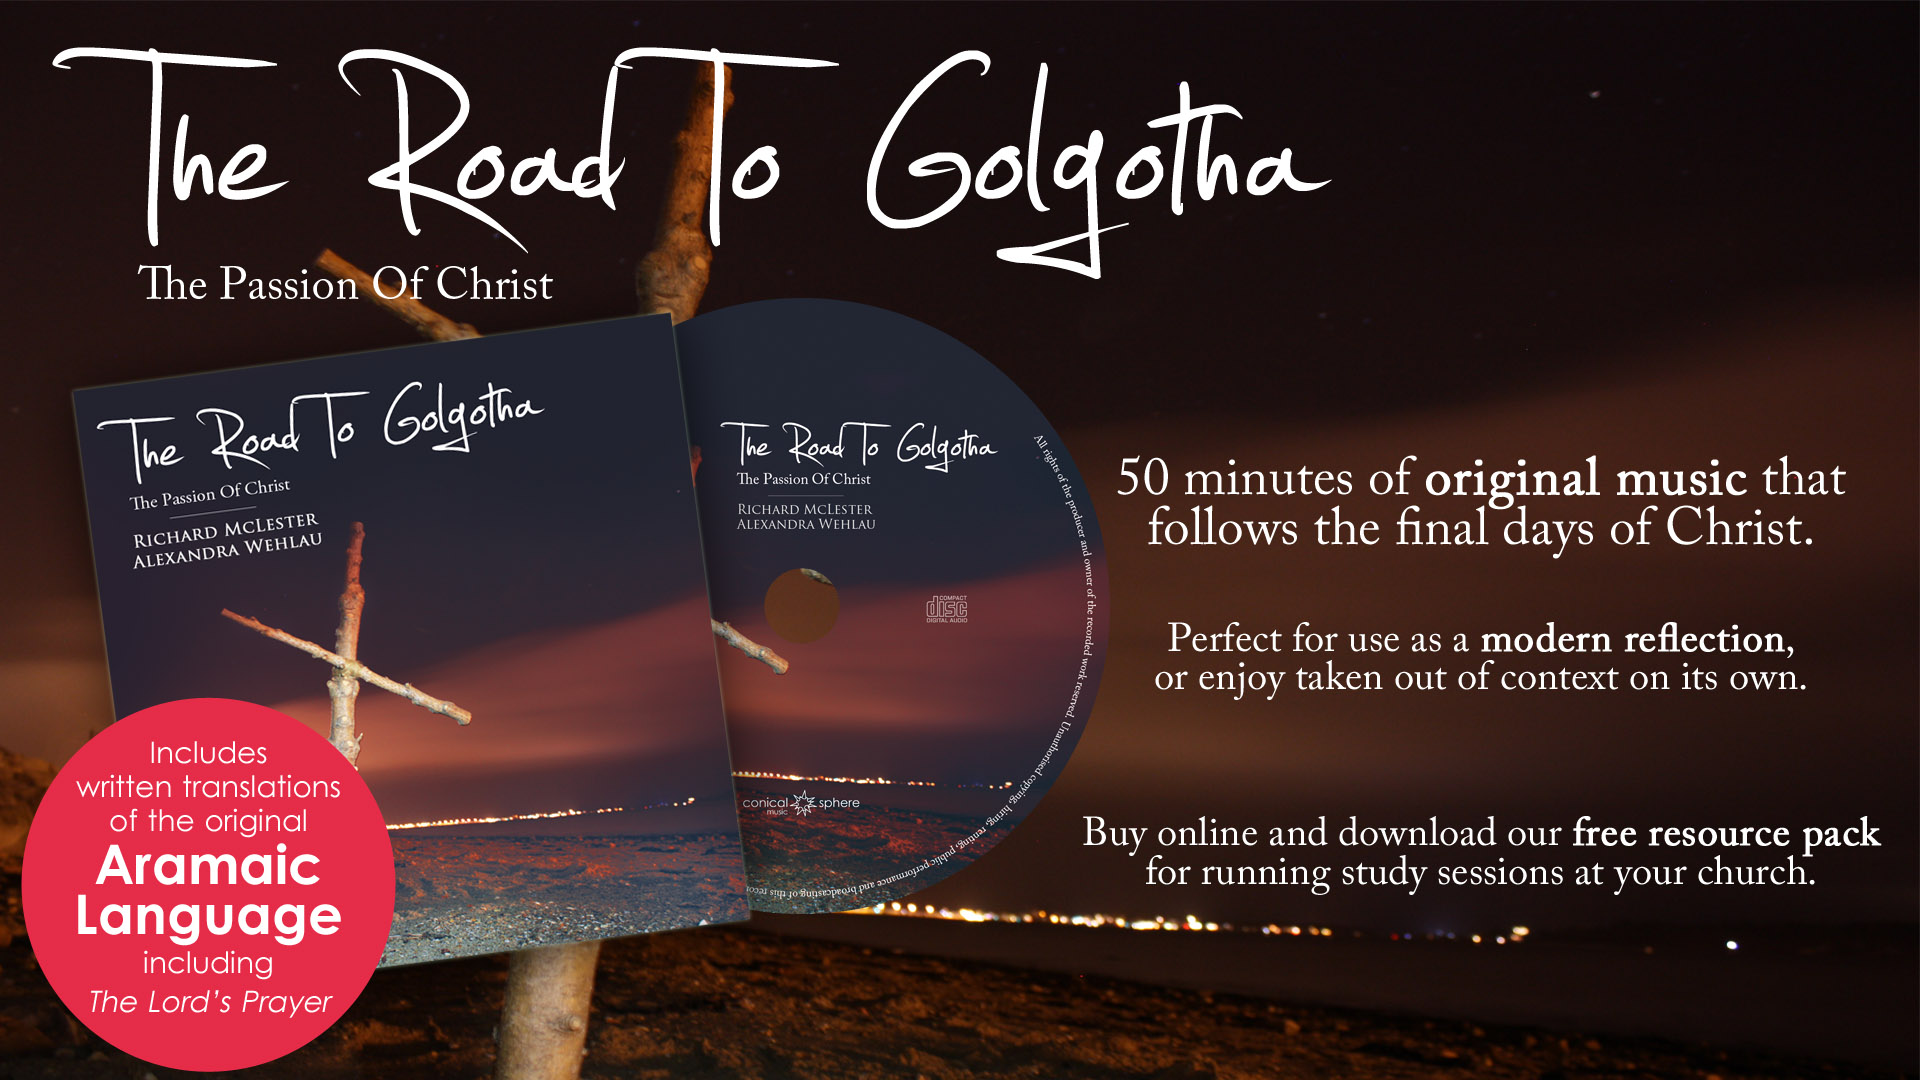 The Road To Golgotha